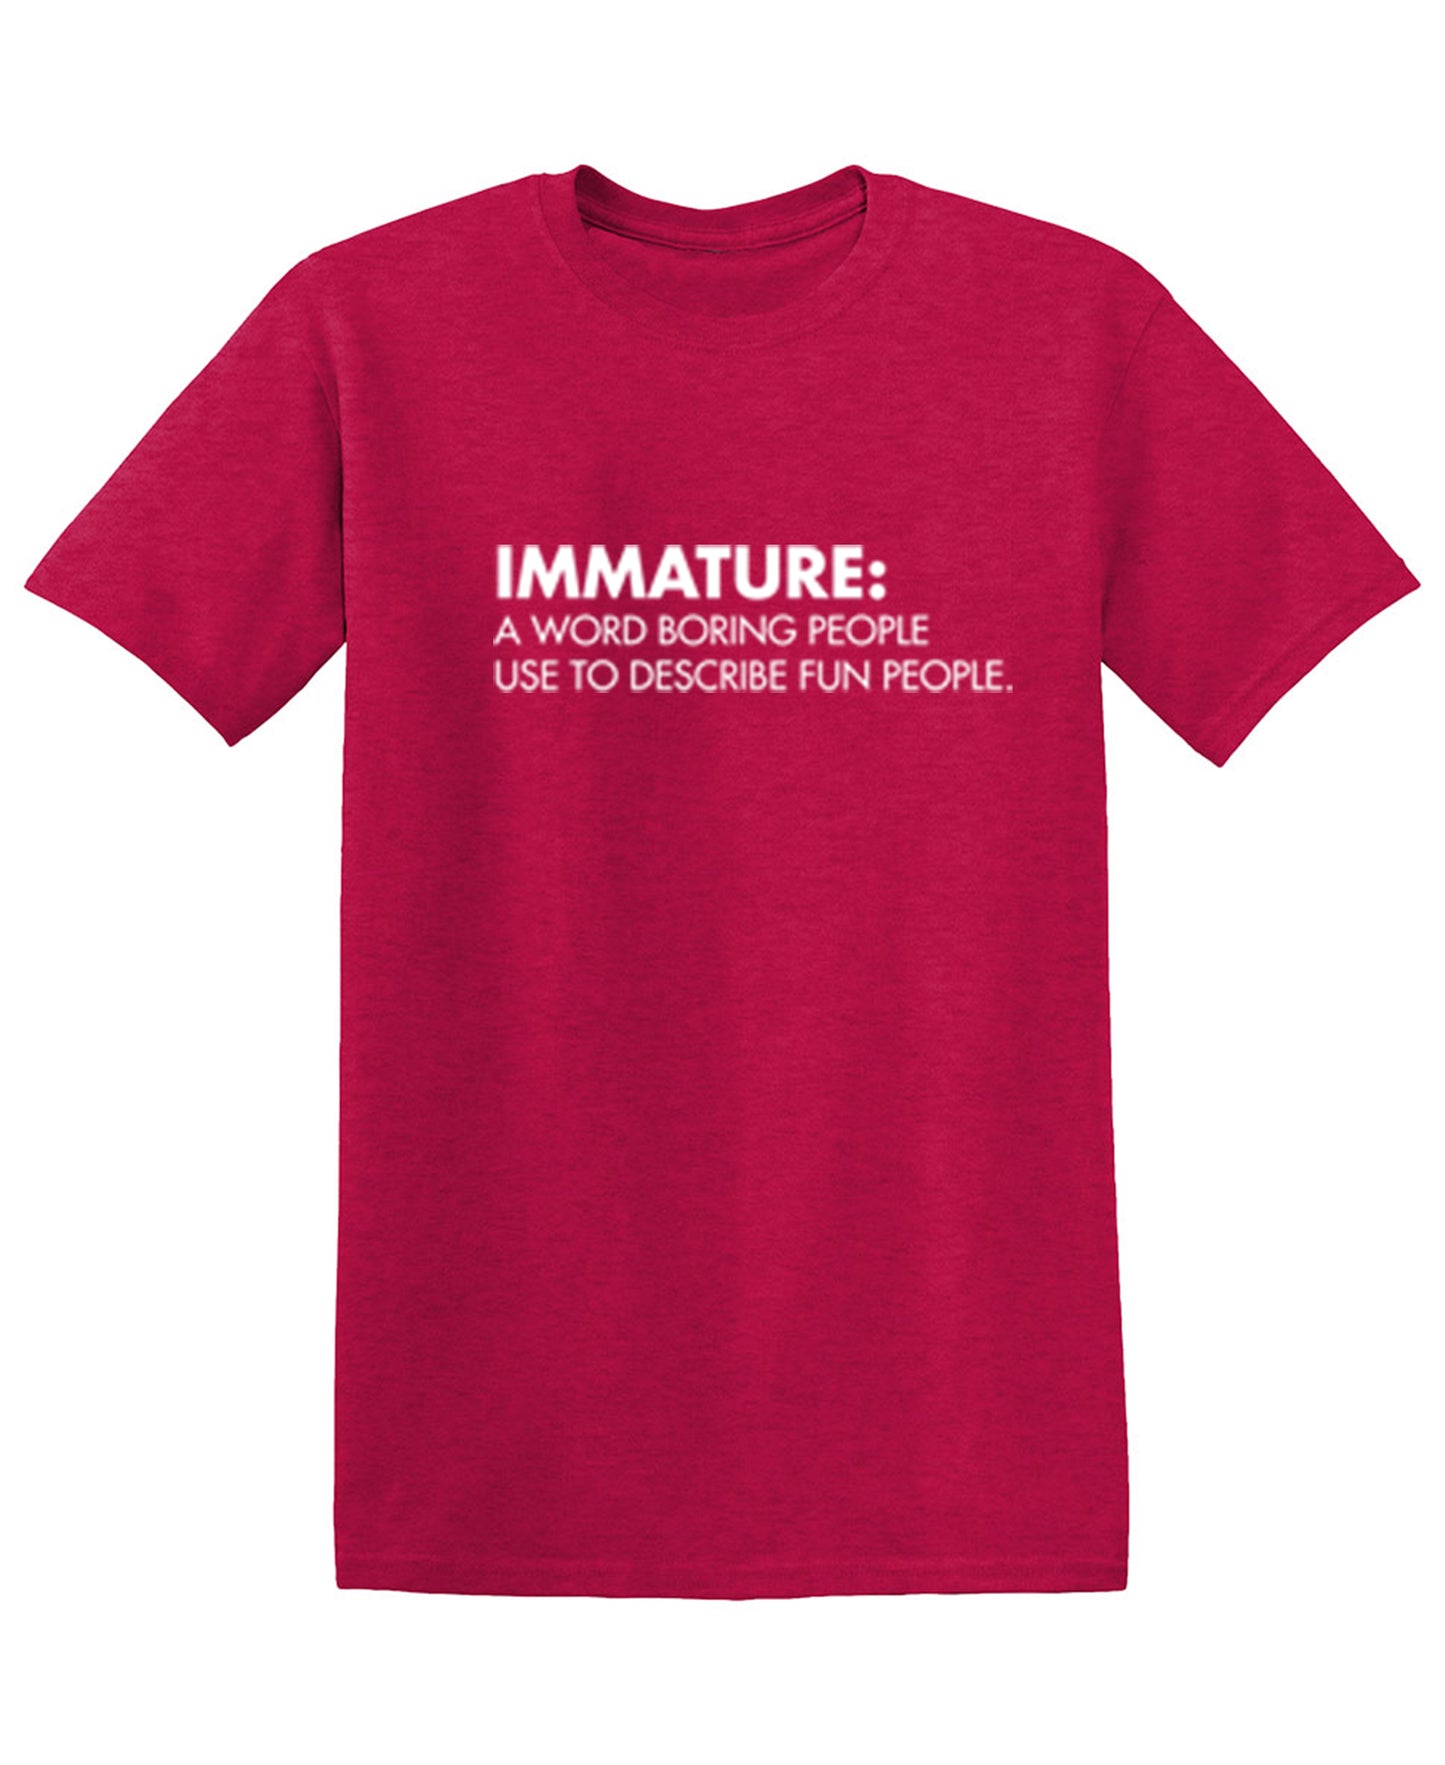 Funny T-Shirts design "Immature: A Word Boring People Use To Describe Fun People"